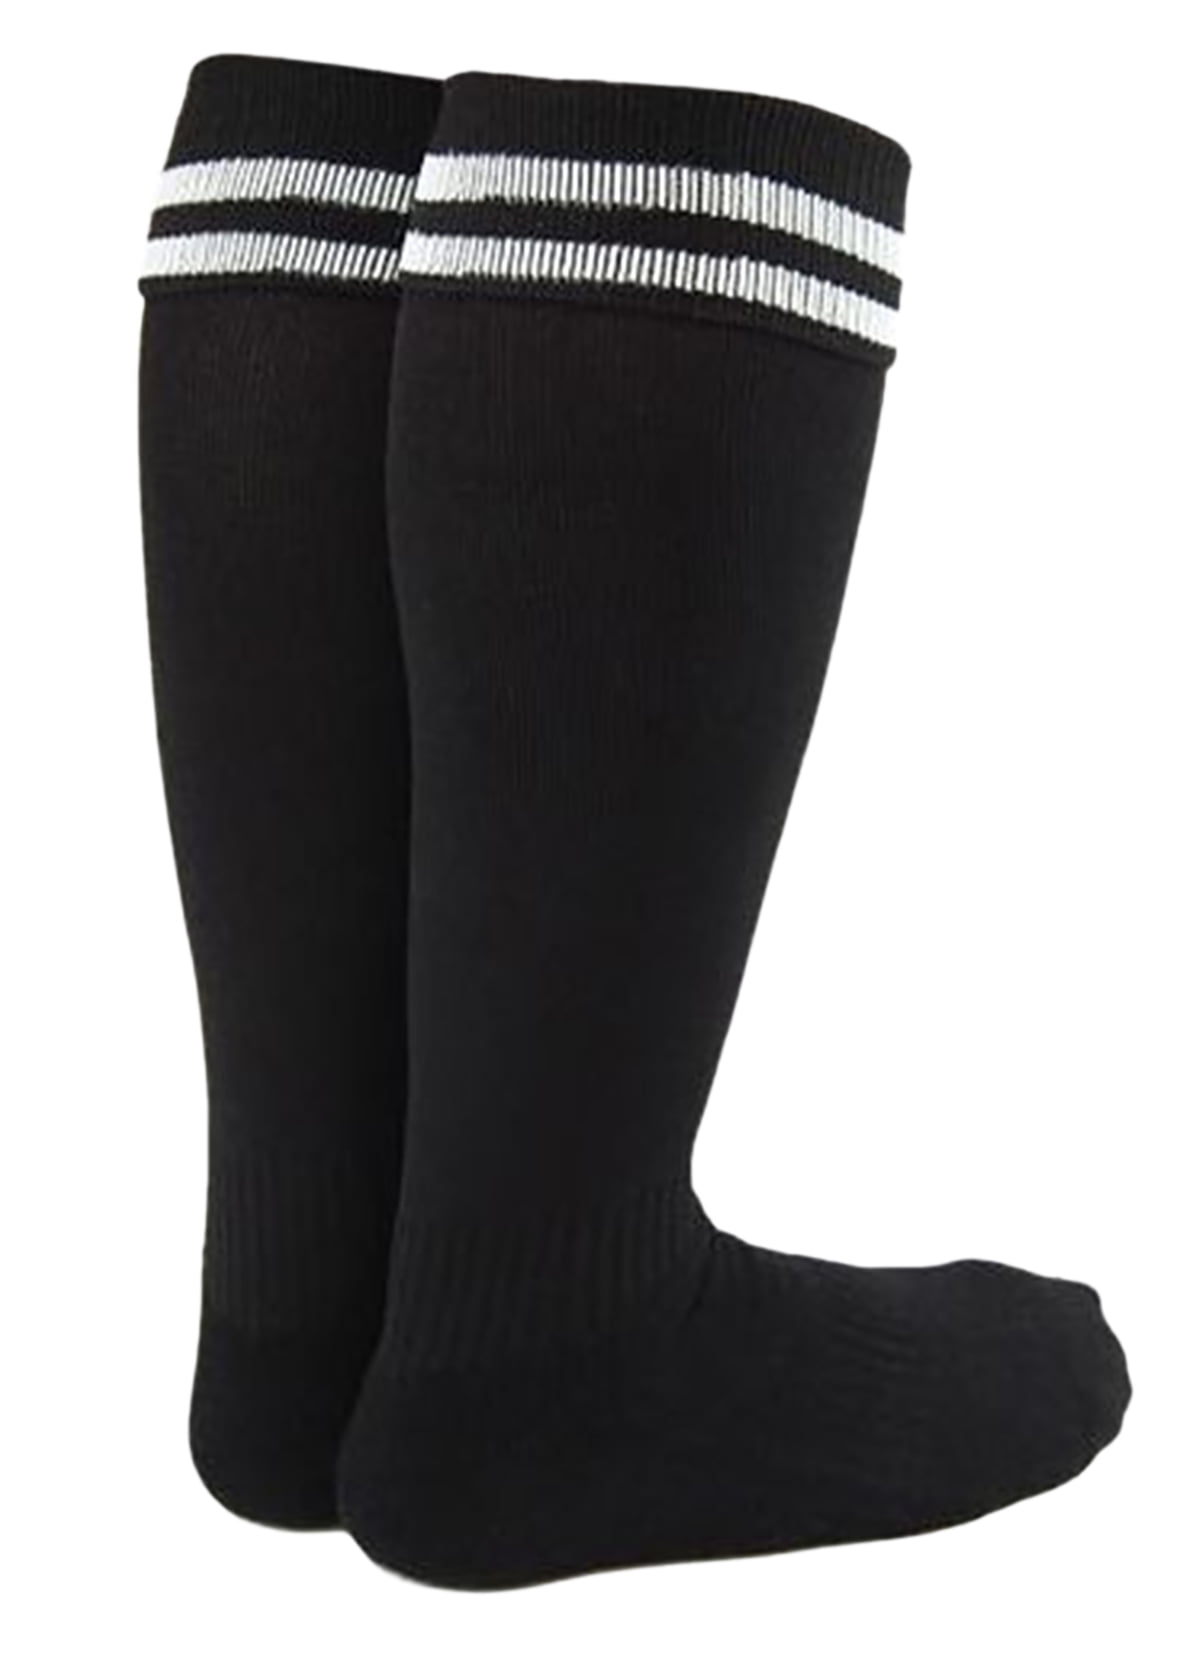 Lovely Annie Boys 2 Pairs Knee High Sports Socks for 